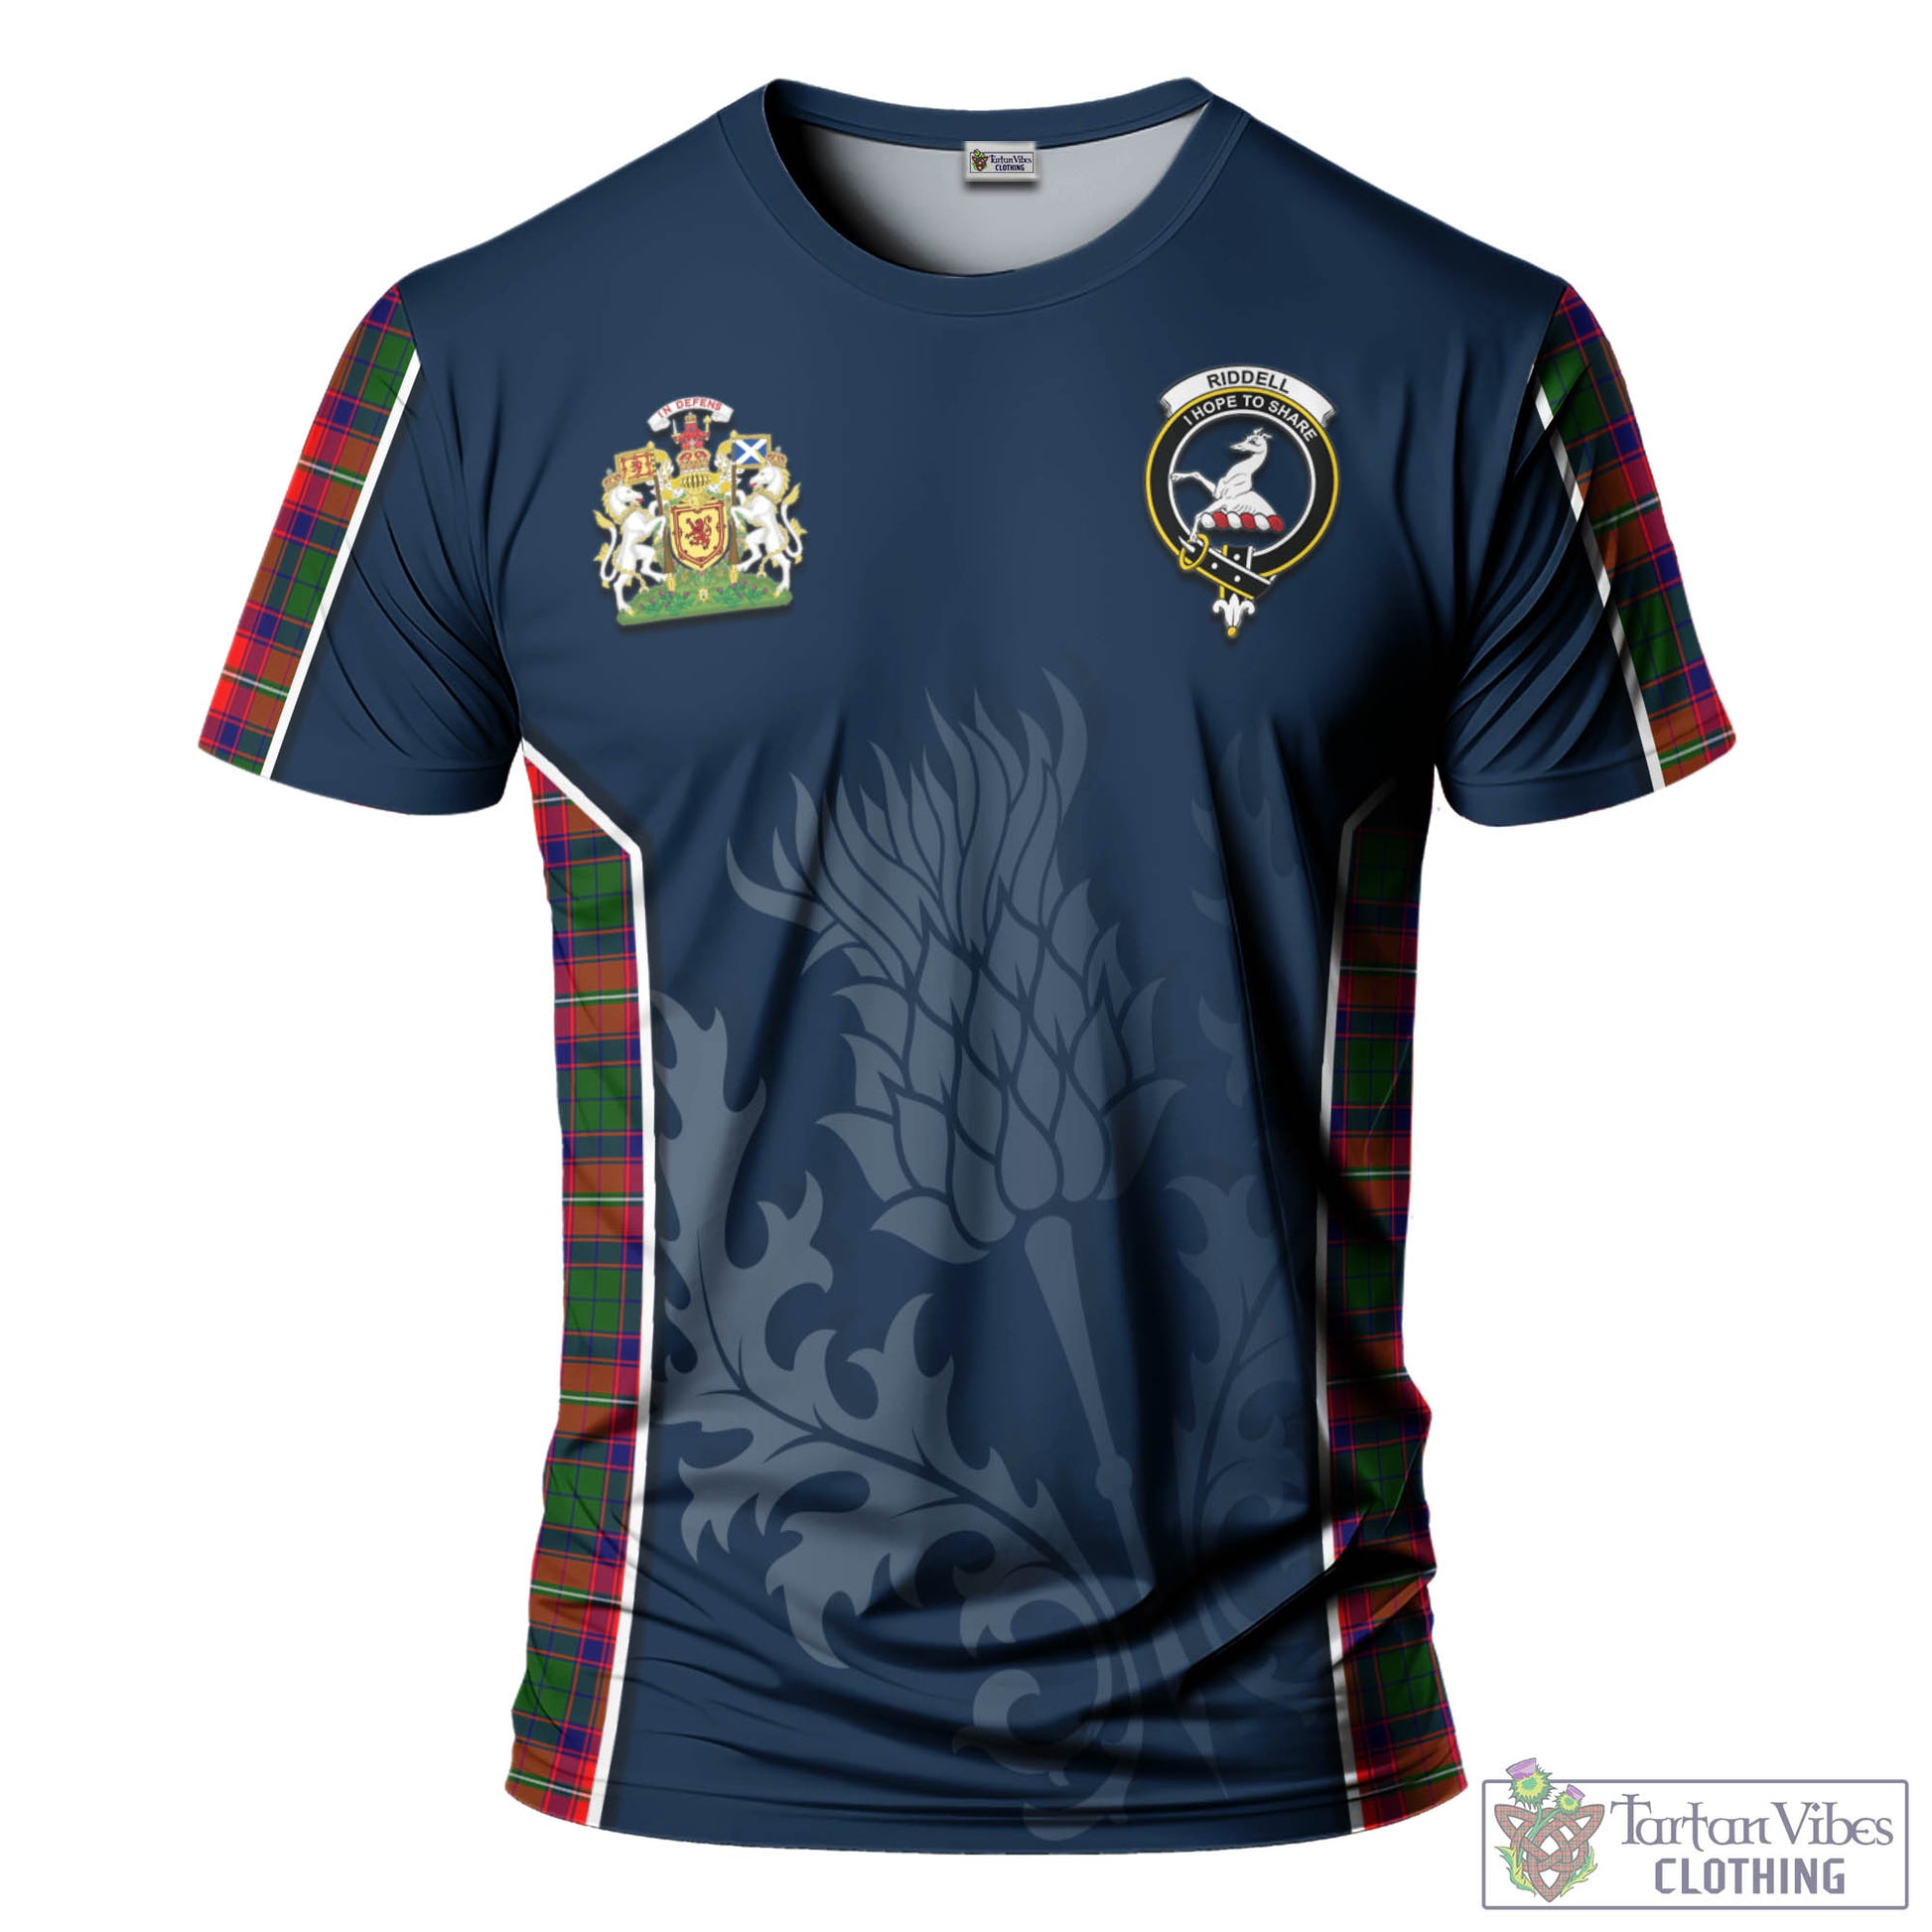 Tartan Vibes Clothing Riddell Tartan T-Shirt with Family Crest and Scottish Thistle Vibes Sport Style